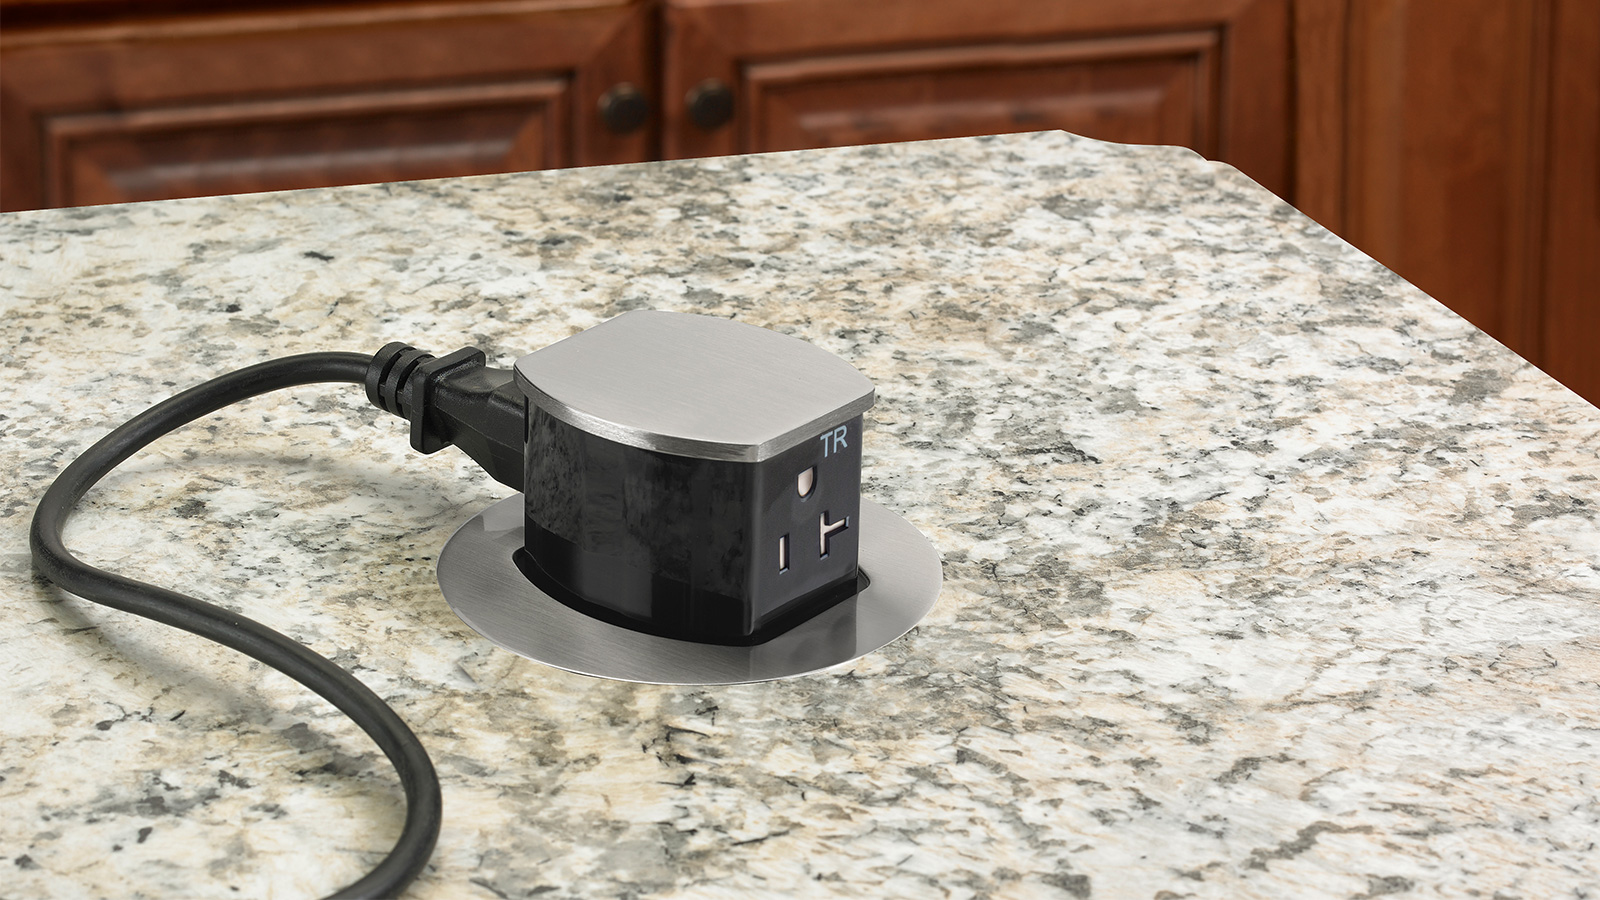 Get Power to Your Countertop Appliances